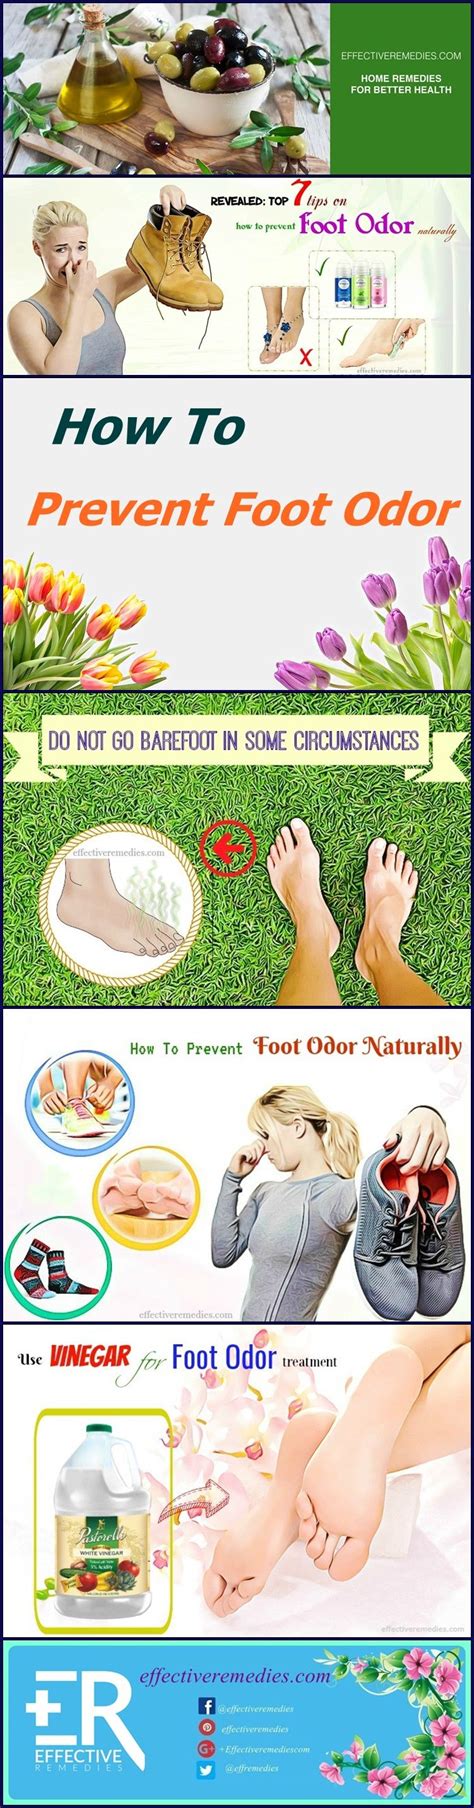 Revealed Top 7 Tips On How To Prevent Foot Odor Naturally Foot Odor Prevention Odor